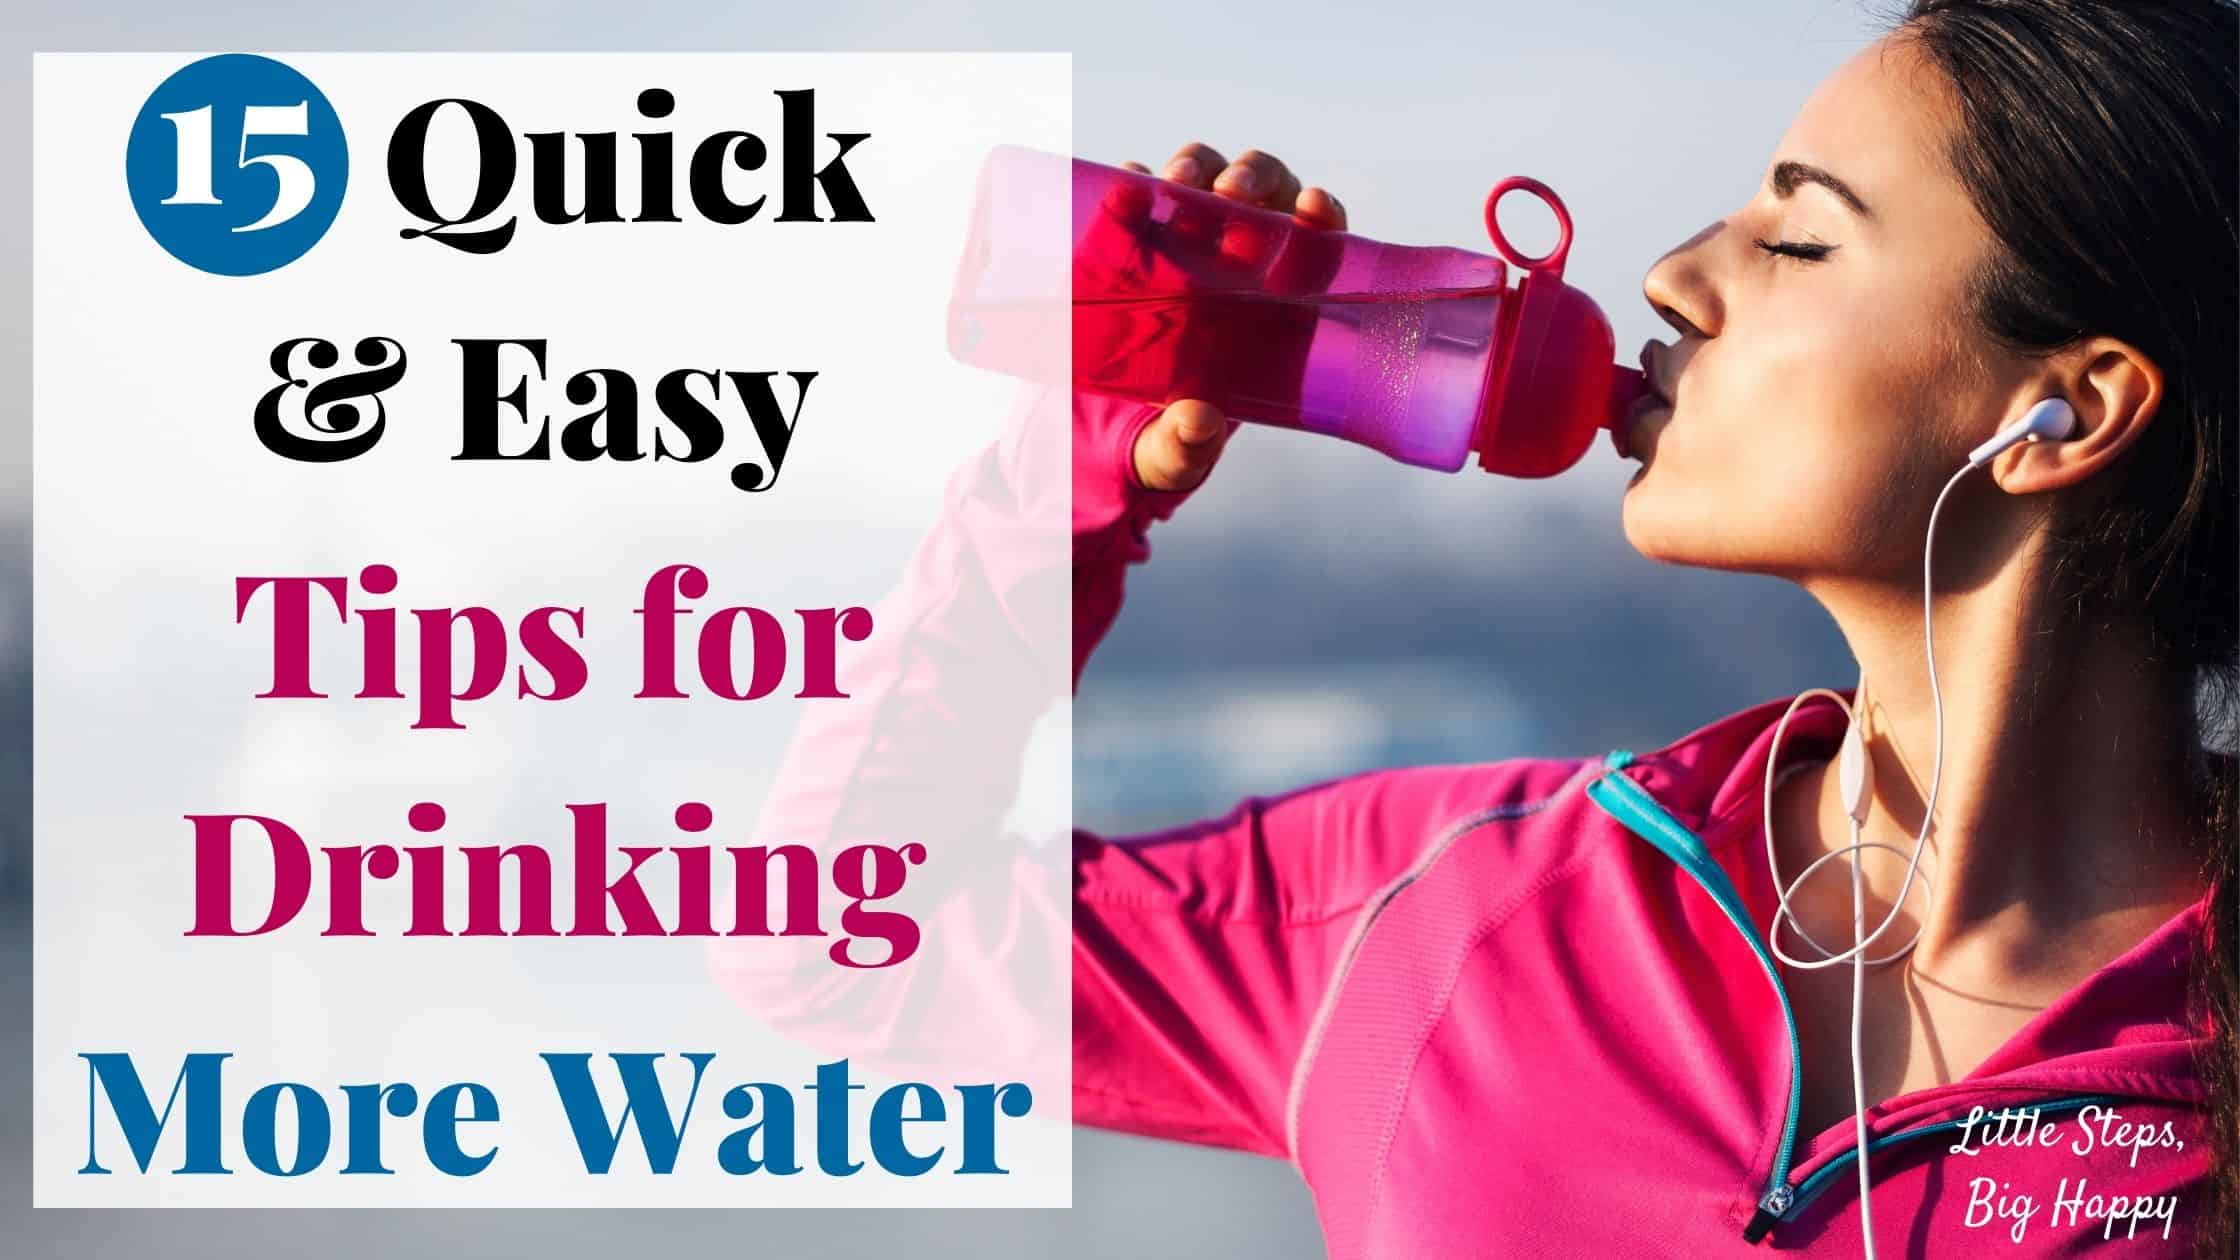 15 Quick and Easy Tips for Drinking More Water